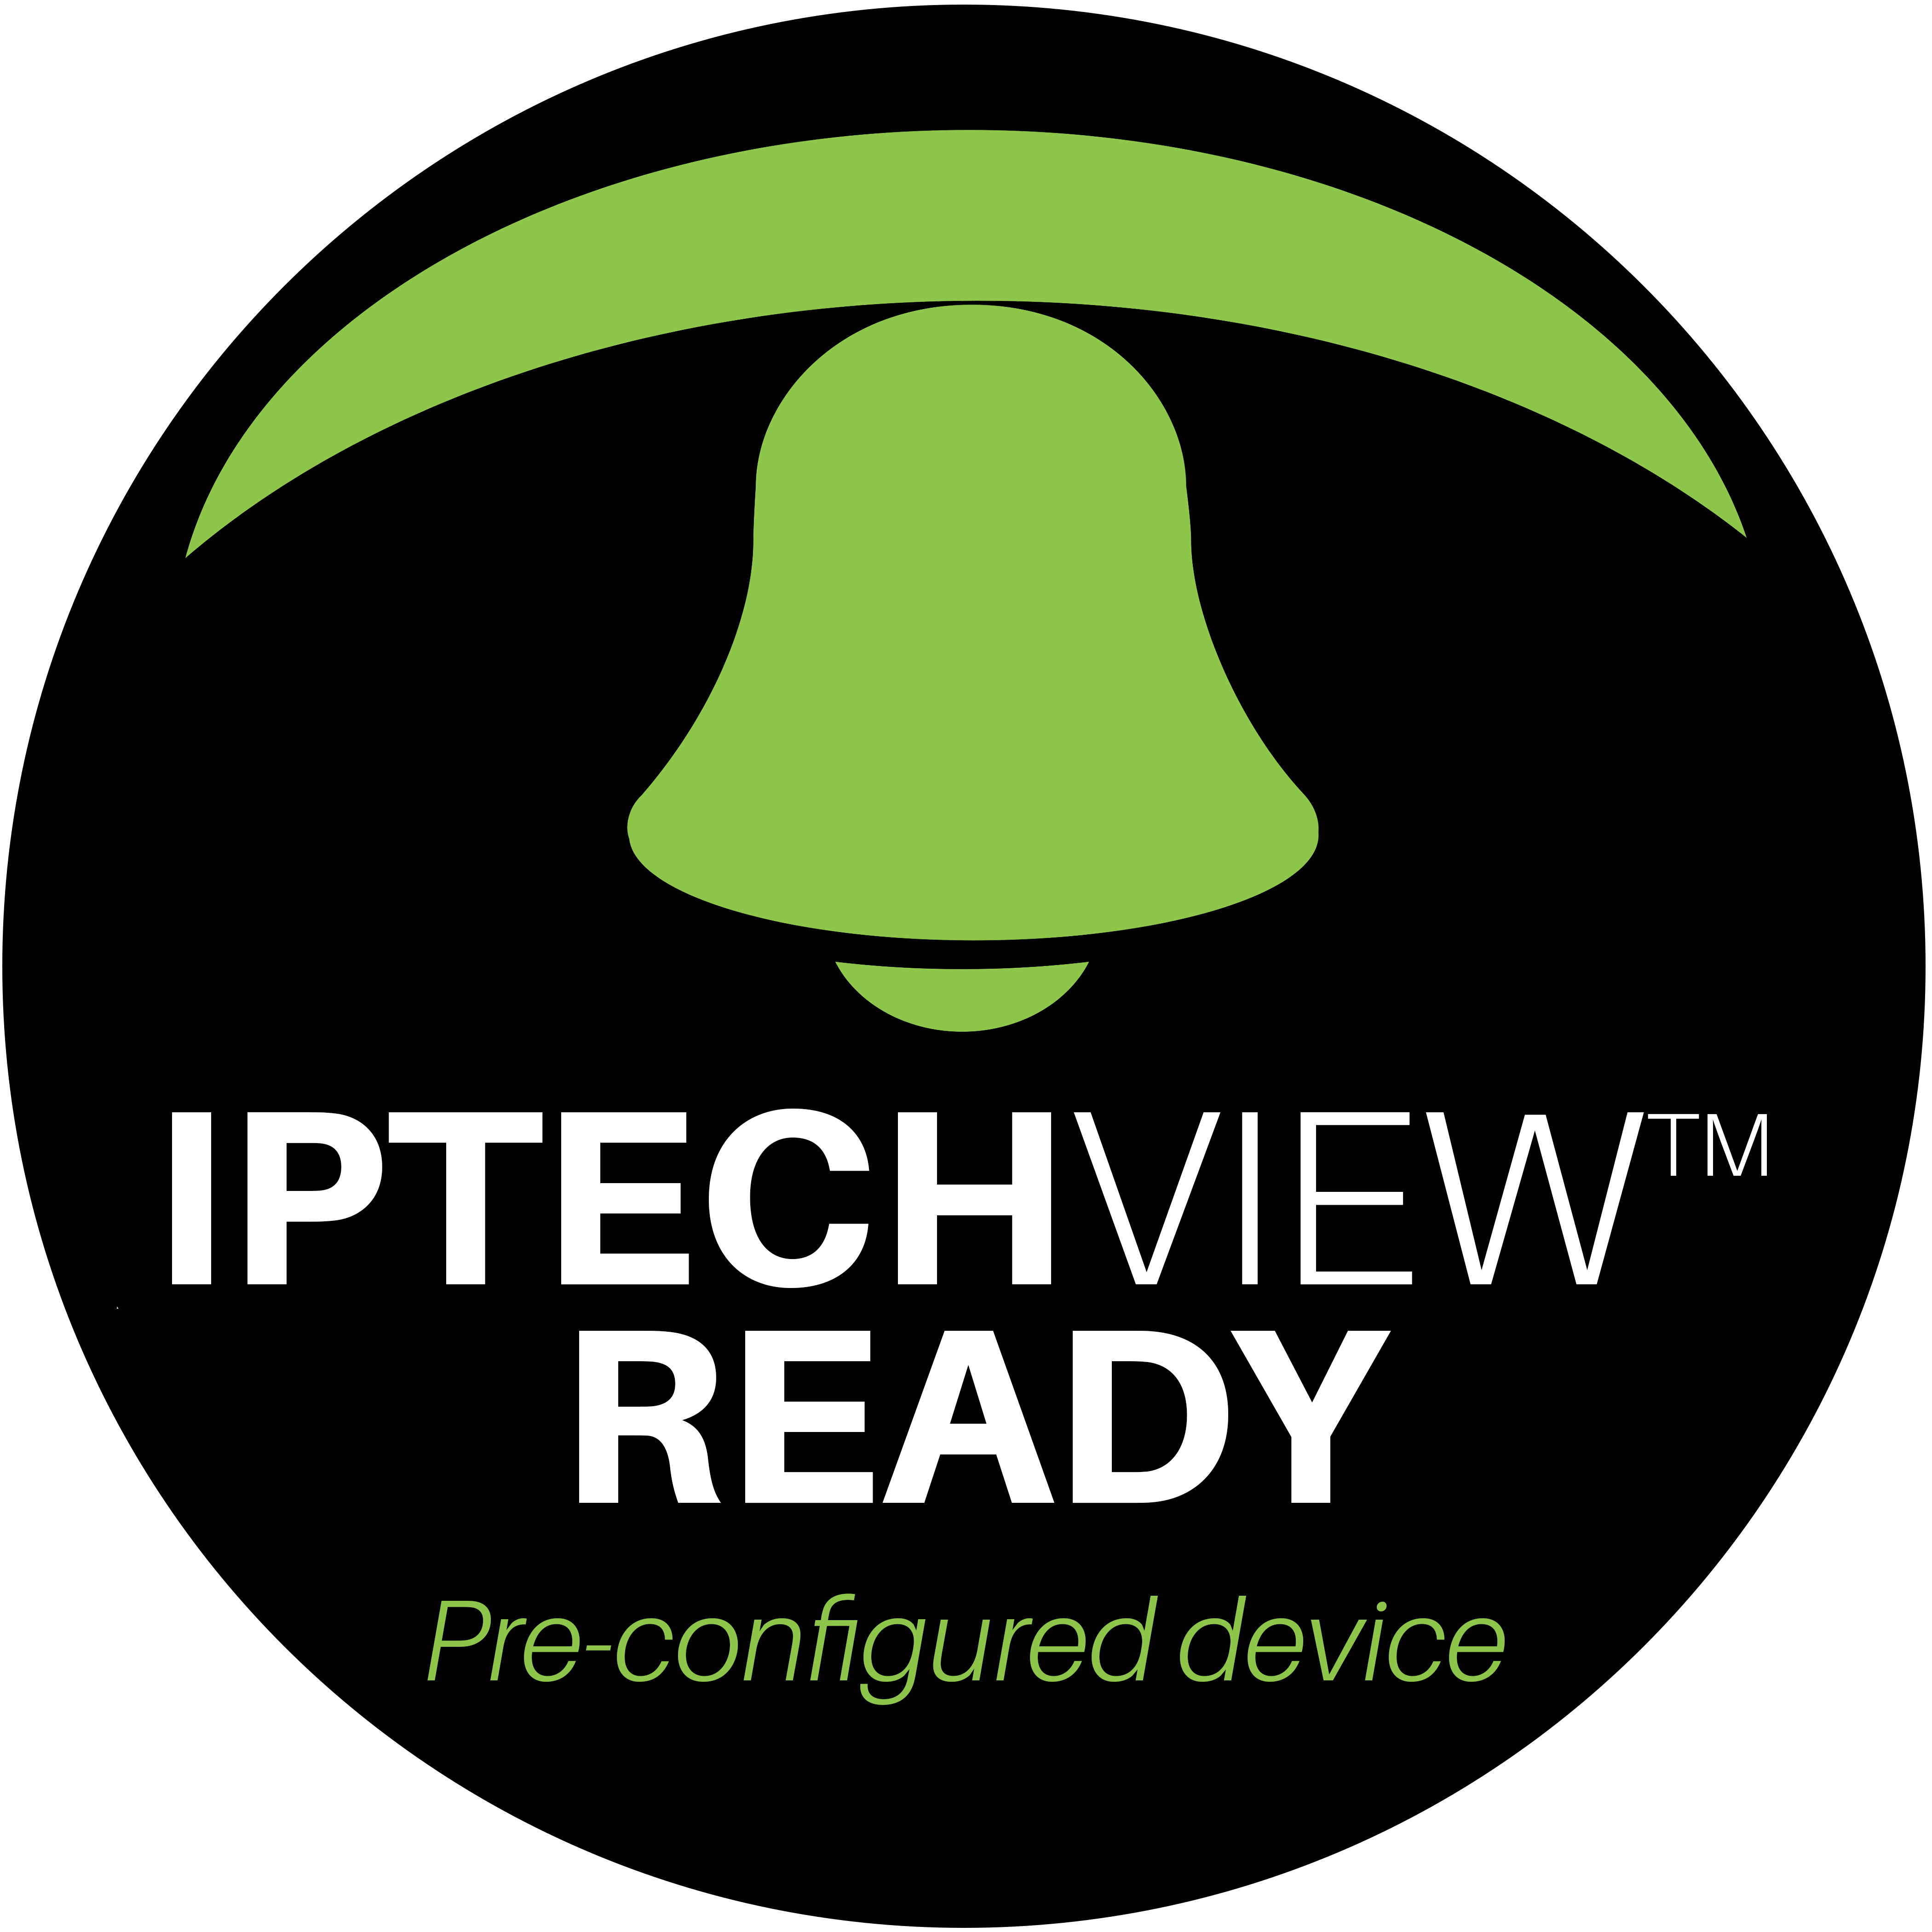 Monitor with IPTECHVIEW